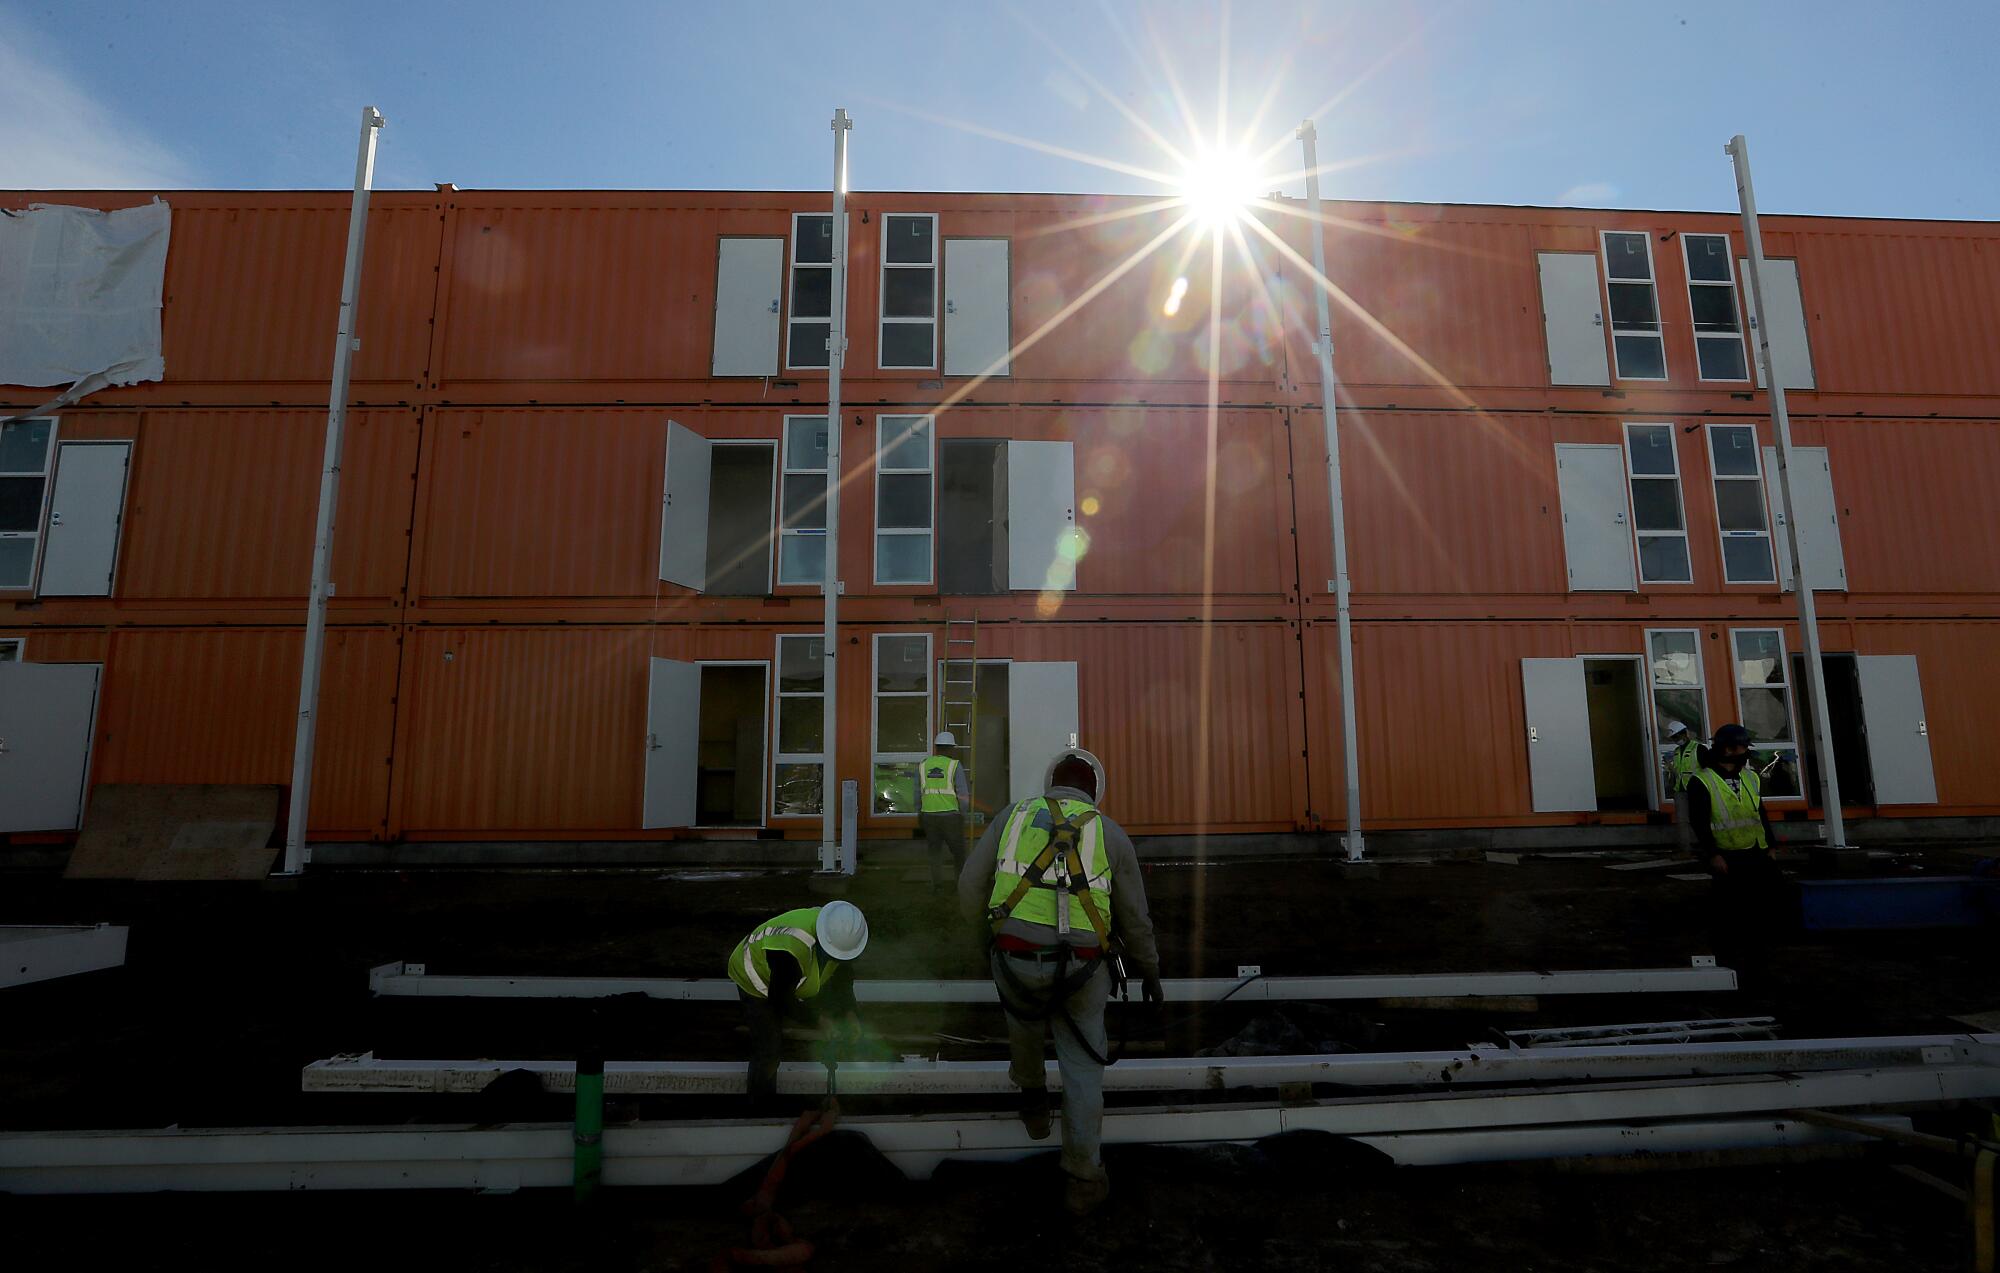 Contractors are rushing to complete a 232-unit homeless housing project in L.A.